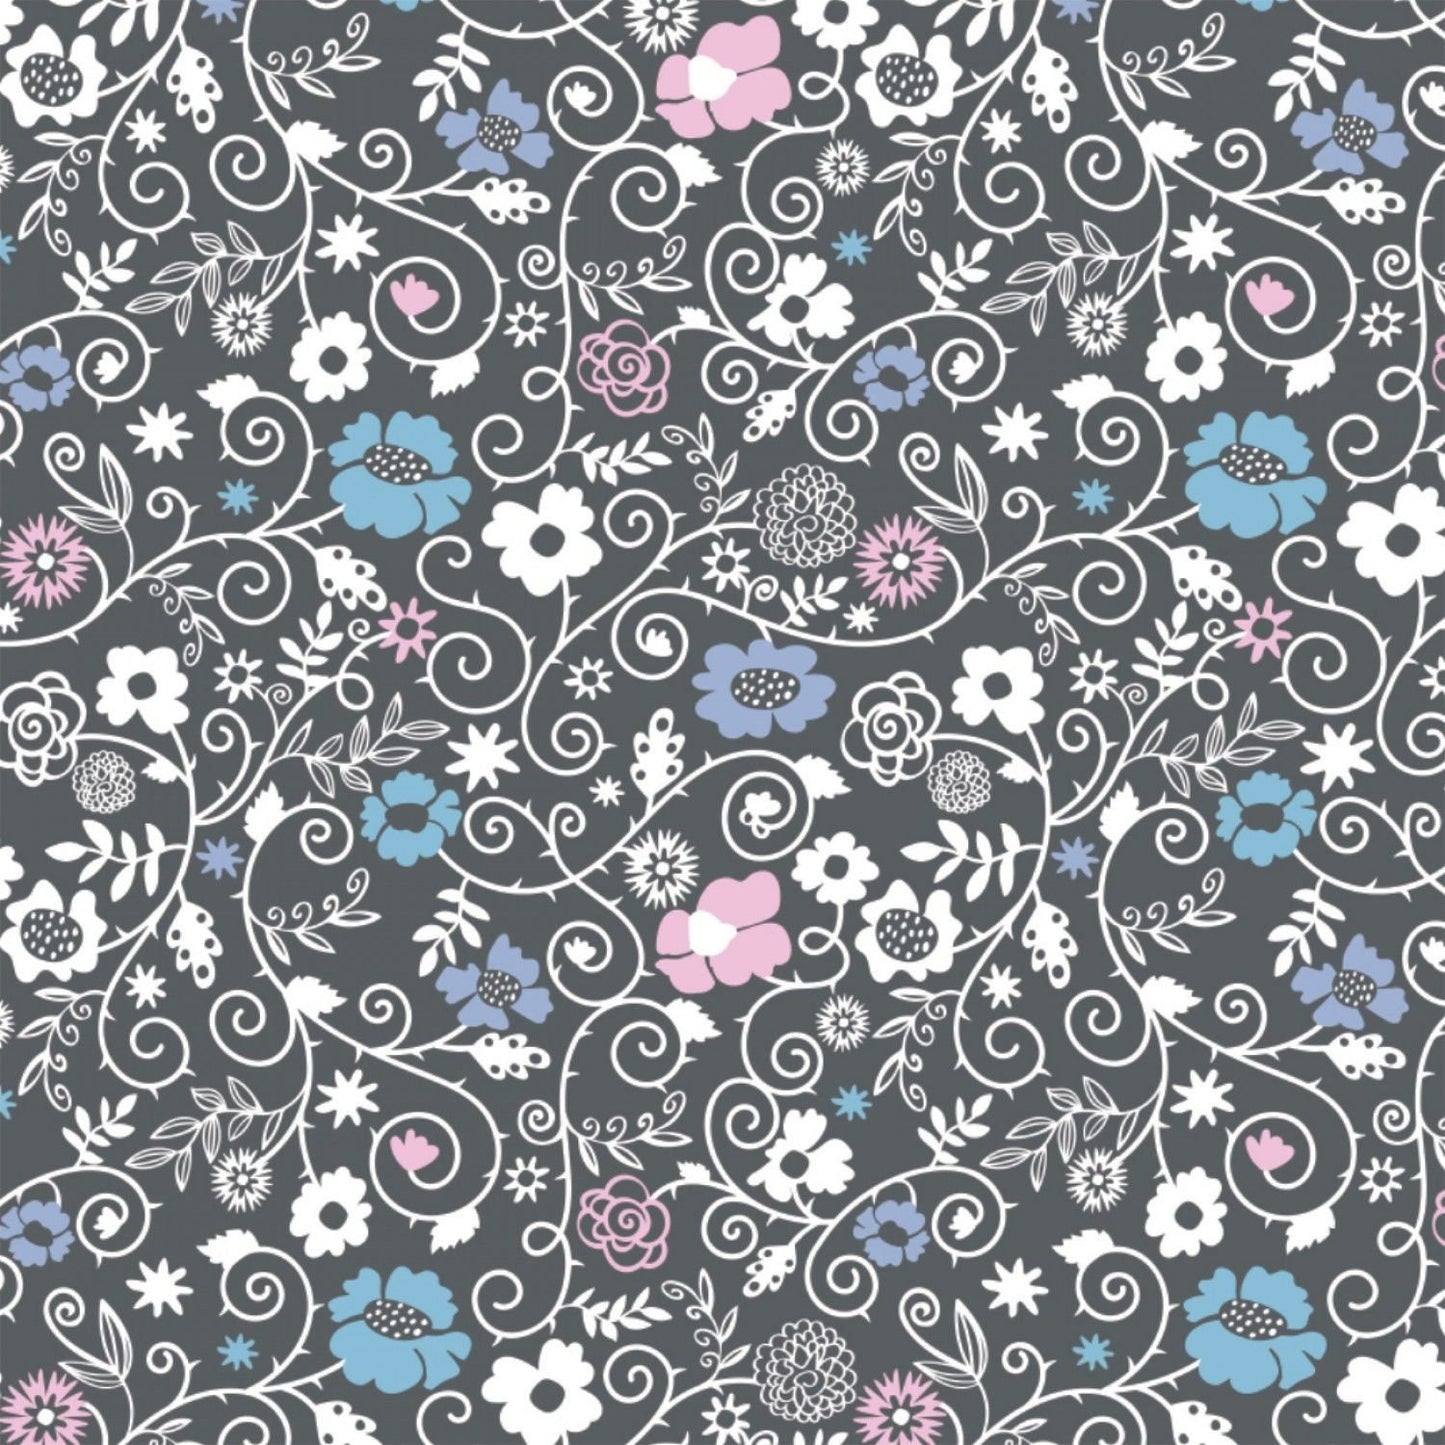 Enchantment by Brooke Glaser Florals Charcoal 77190103-2 Cotton Woven Fabric